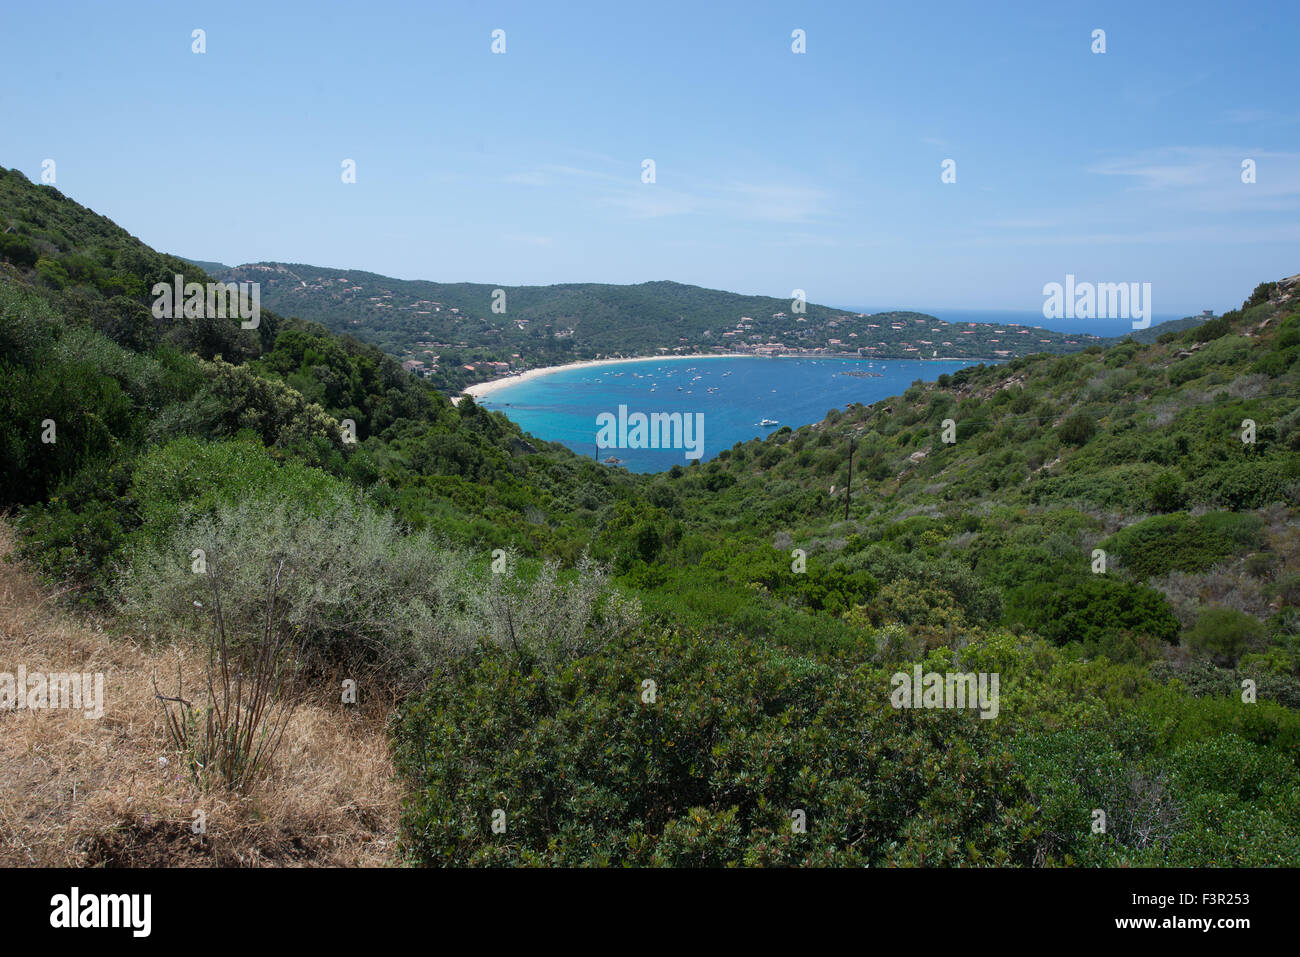 Campomoro bay seen from the hills, Corsica, France Stock Photo - Alamy